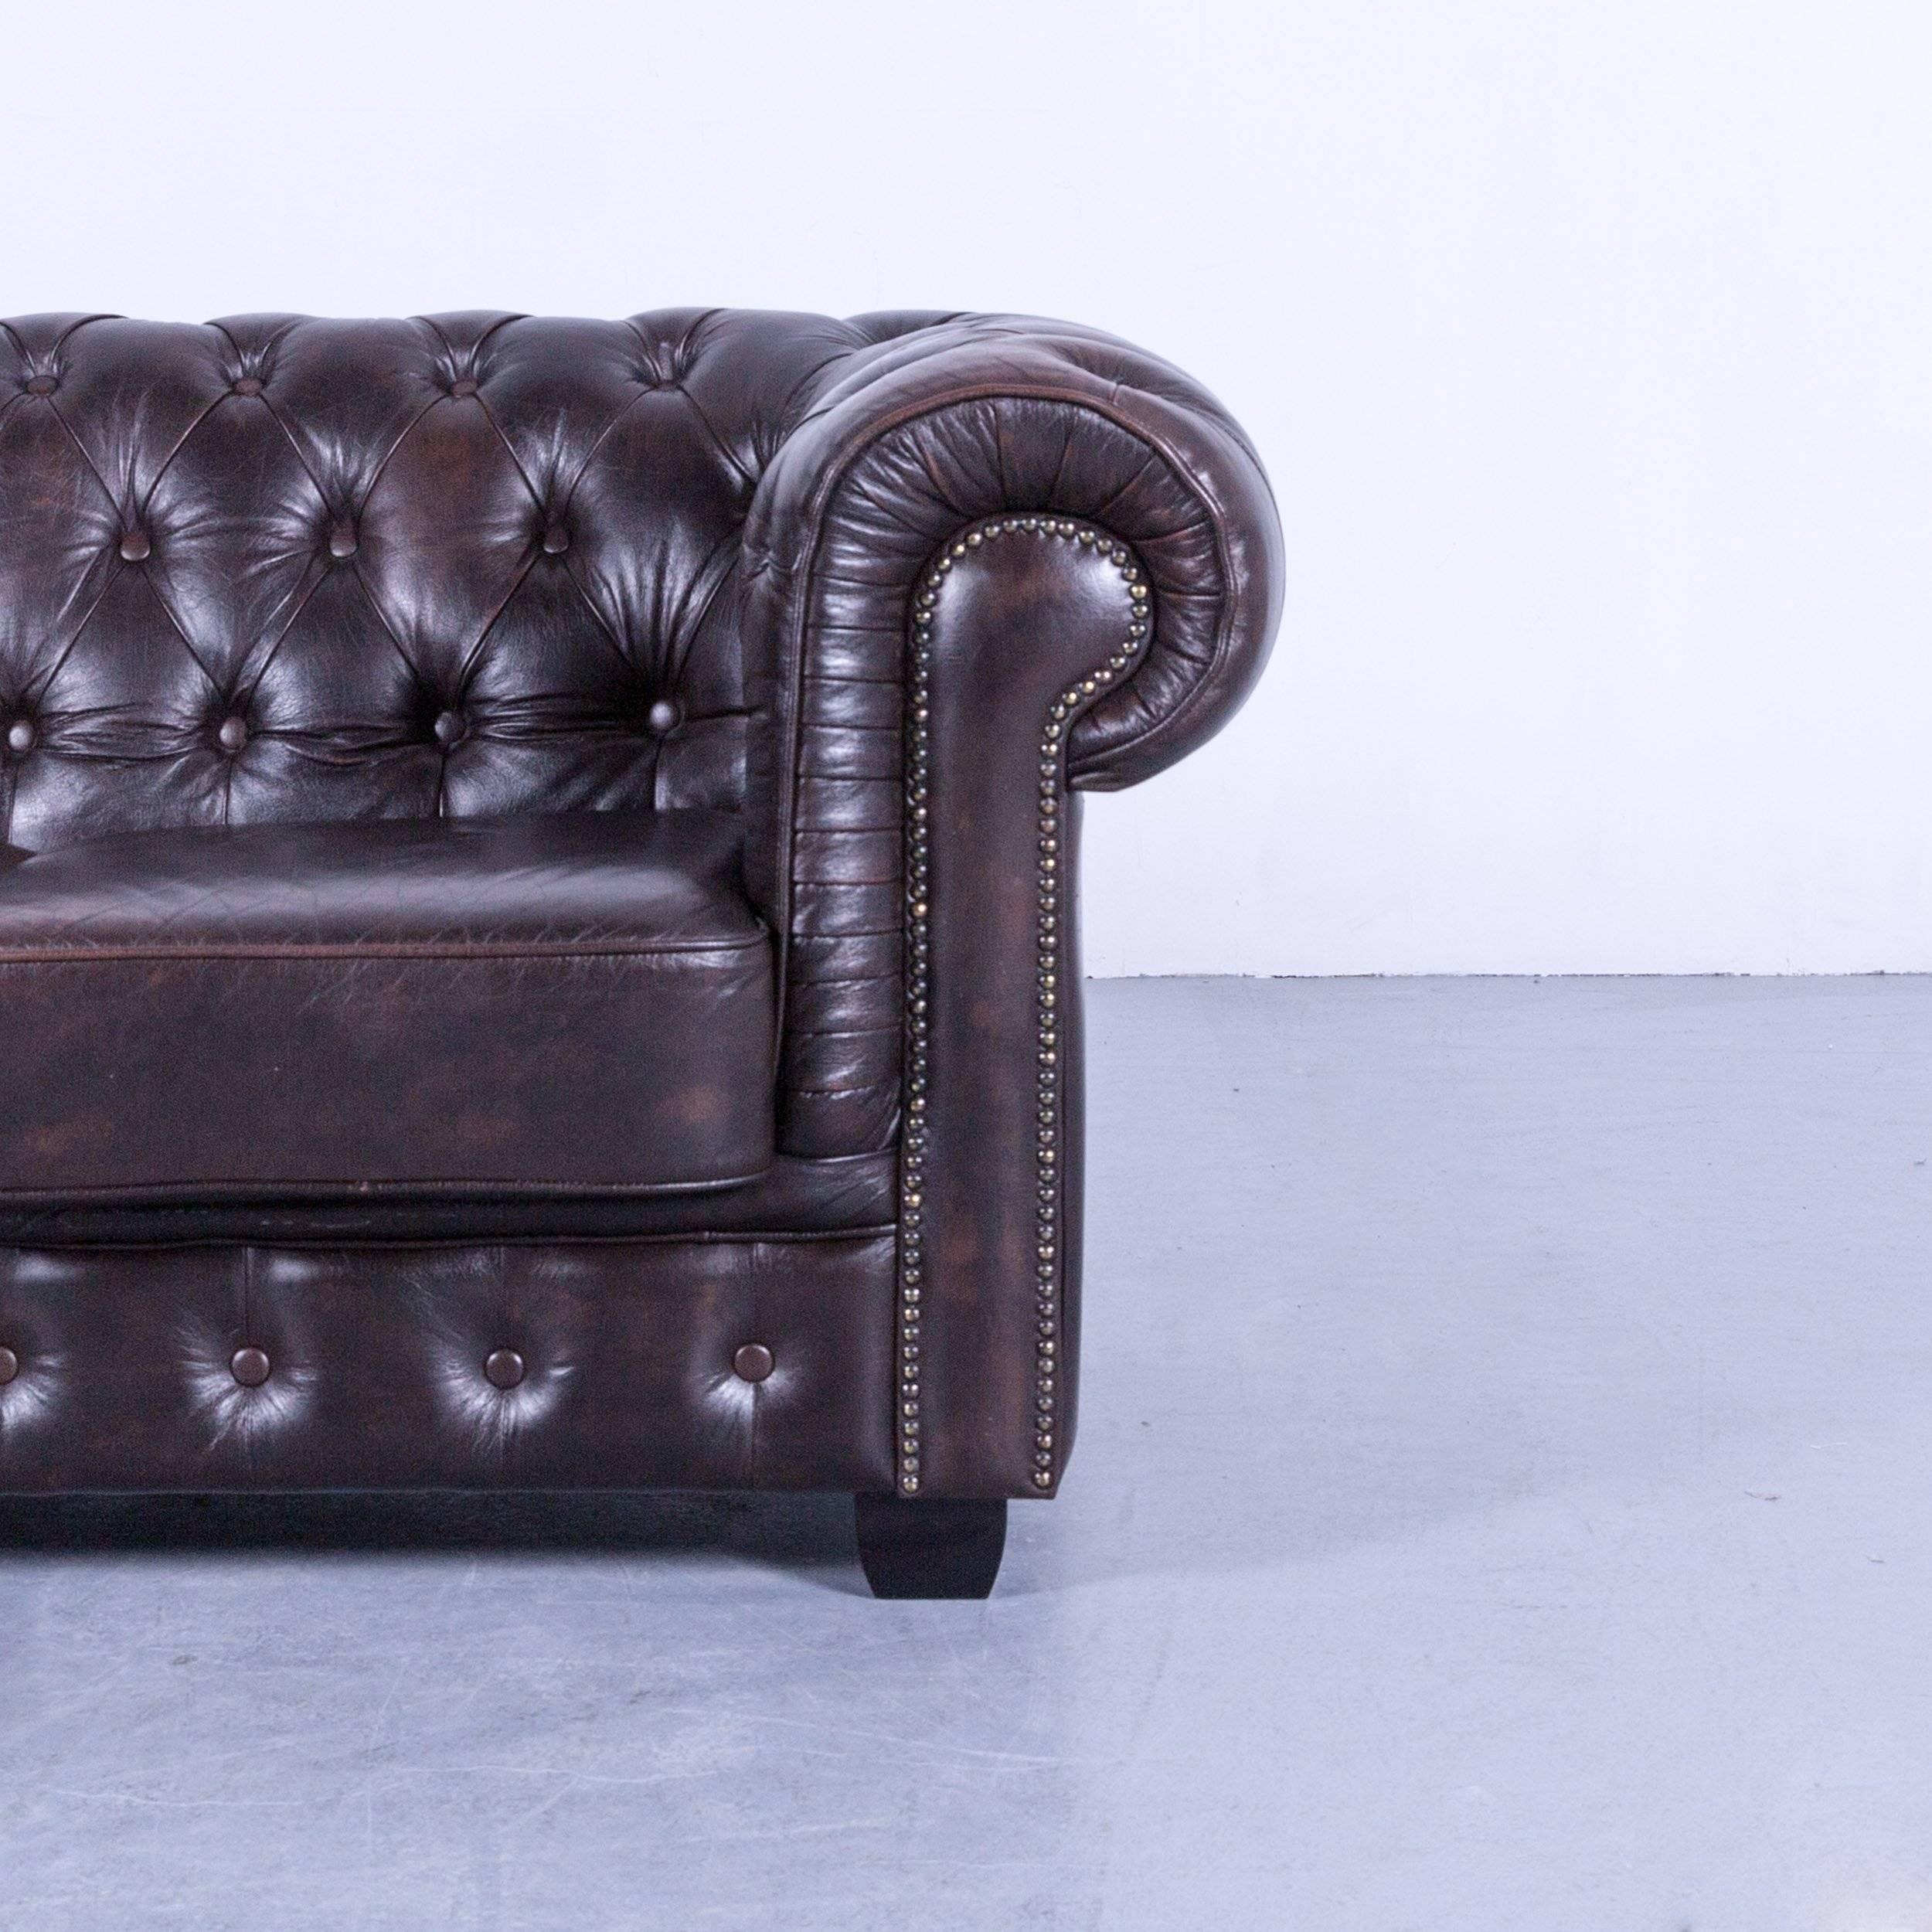 Chesterfield Three-Seat Sofa Brown Vintage Retro Handmade Rivets In Good Condition For Sale In Cologne, DE